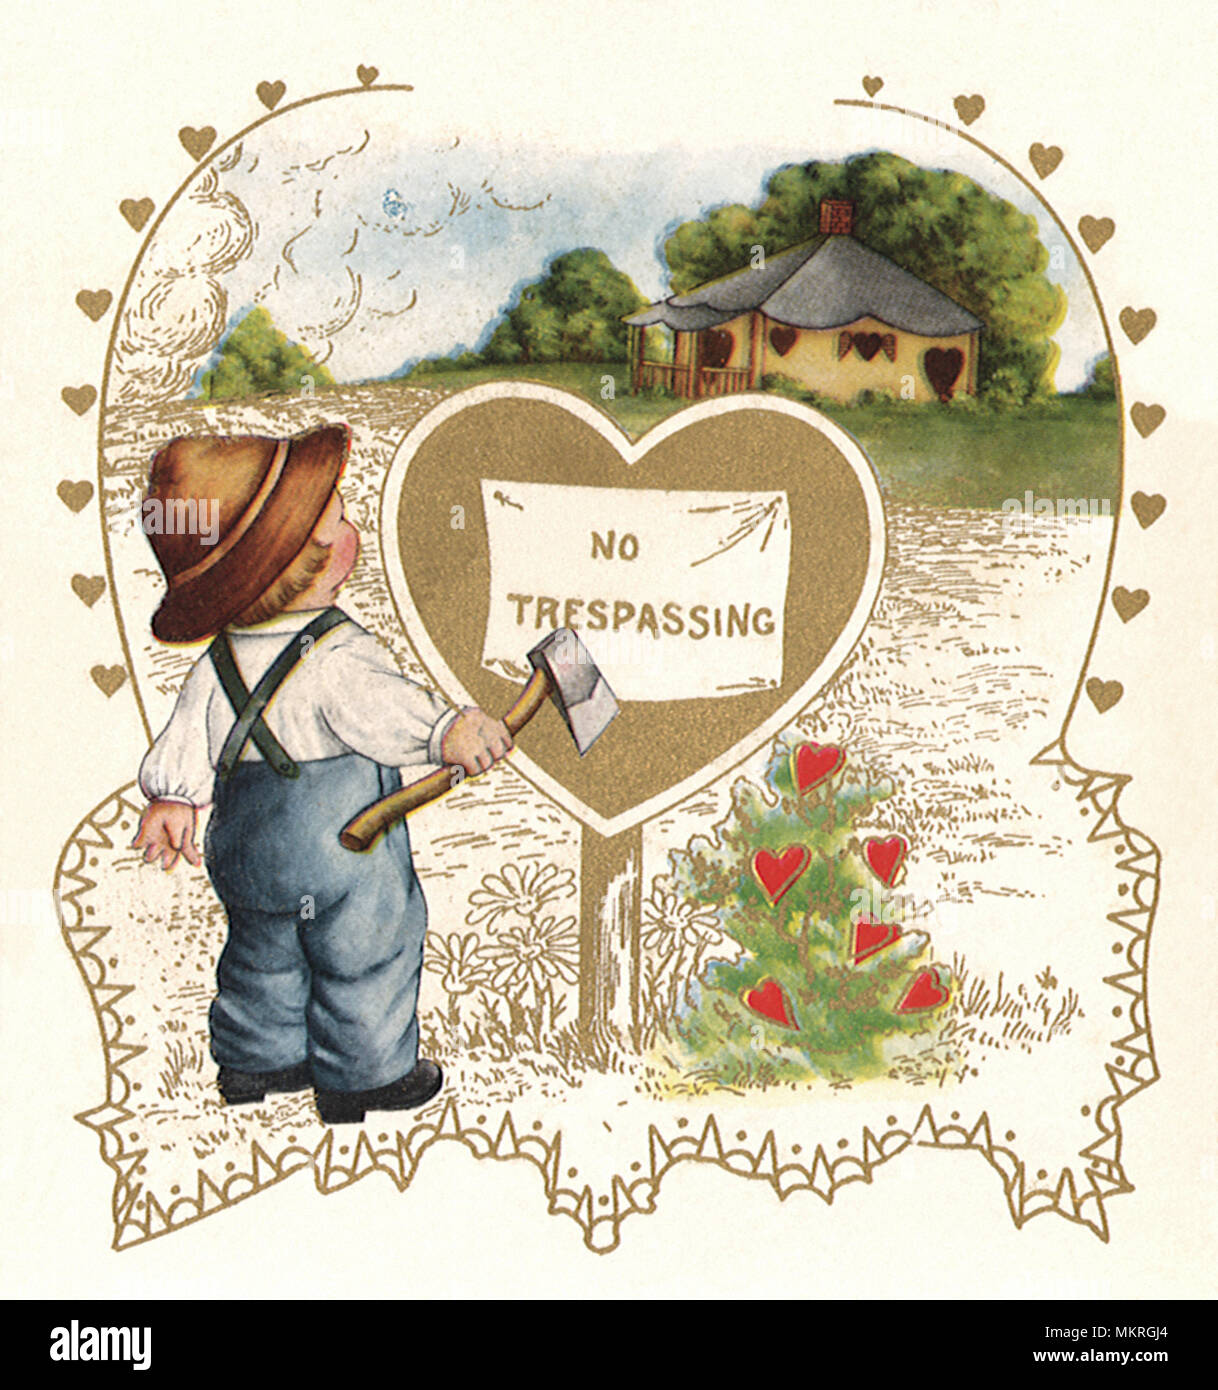 Boy with hatchet stands by Heart Sign reading no trespassing Stock Photo